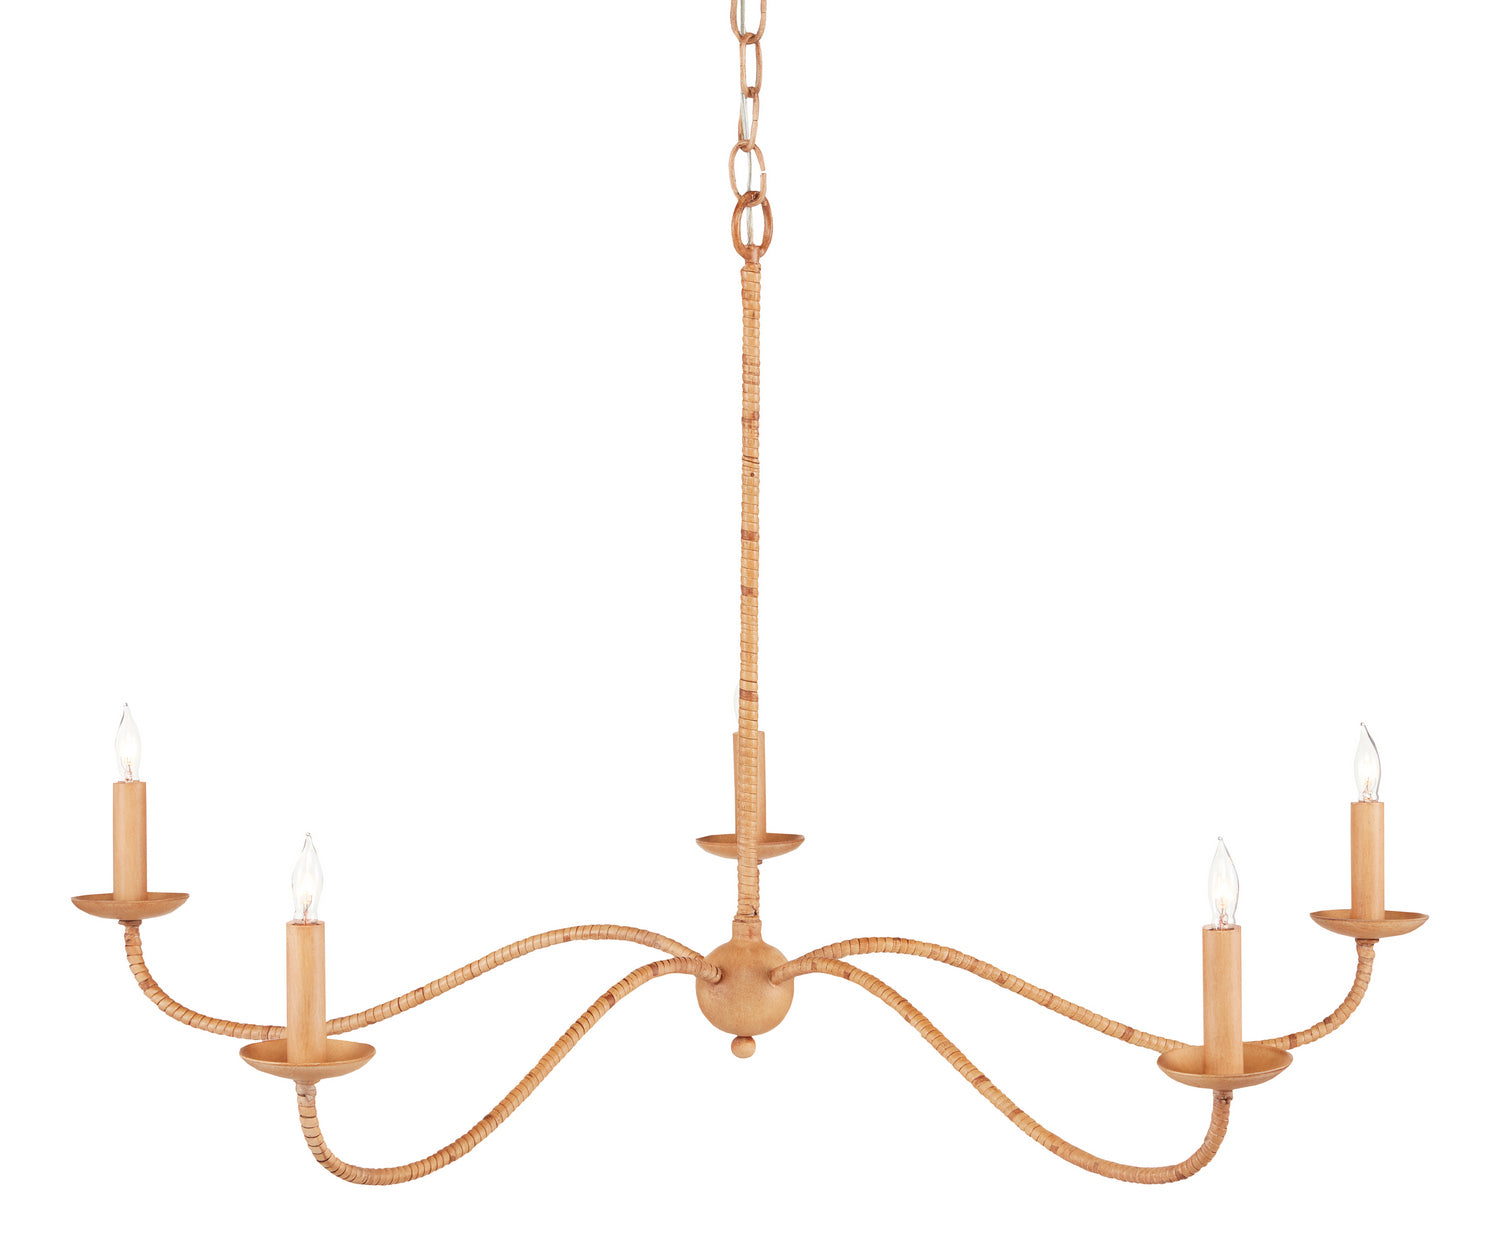 Five Light Chandelier from the Saxon Rattan collection in Saddle Tan/Natural Rattan finish